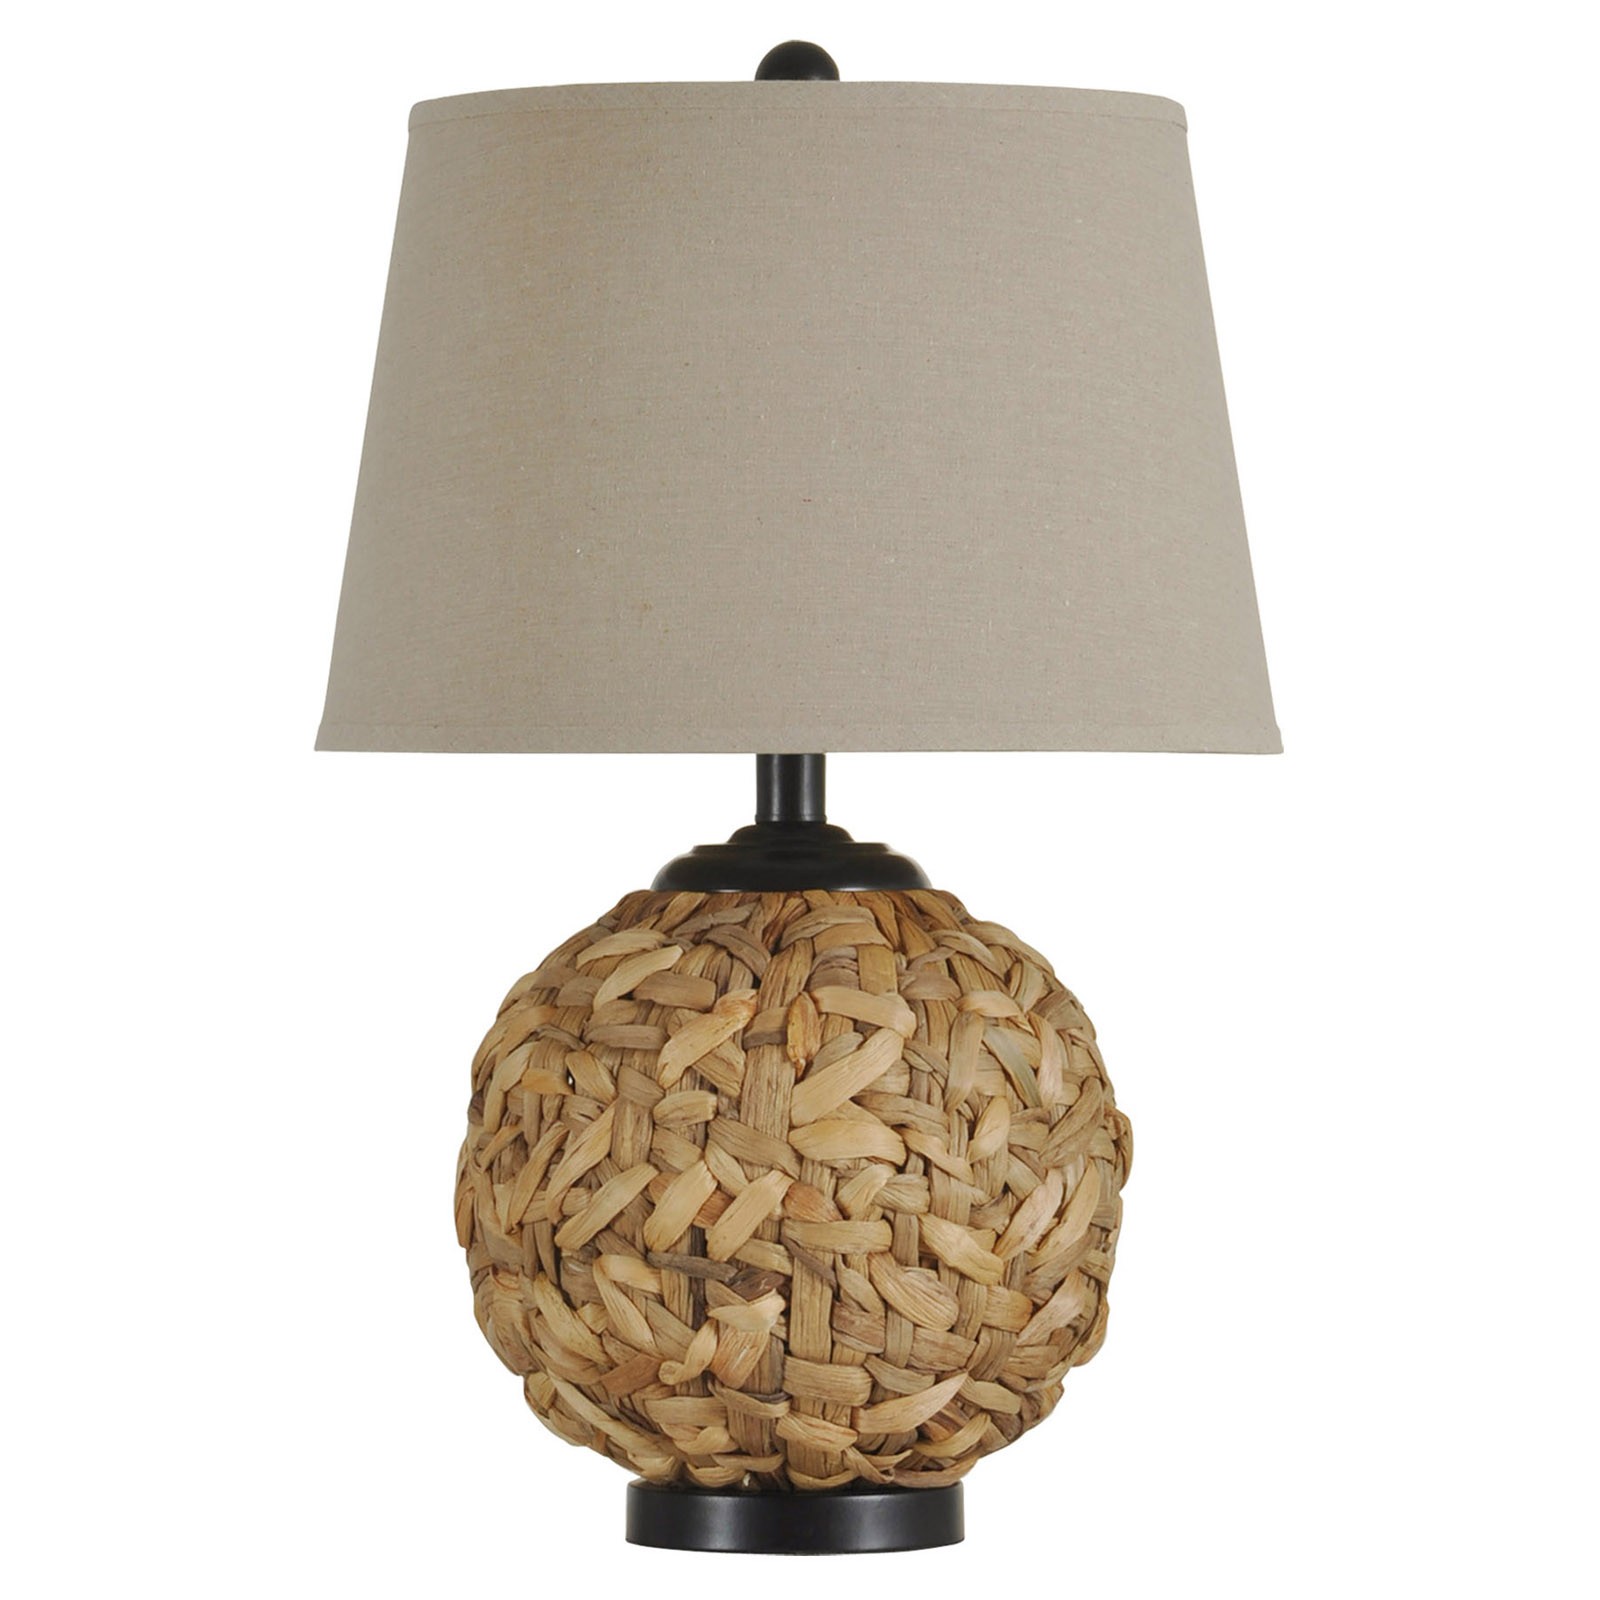 Style craft seagrass table lamp at hayneedle